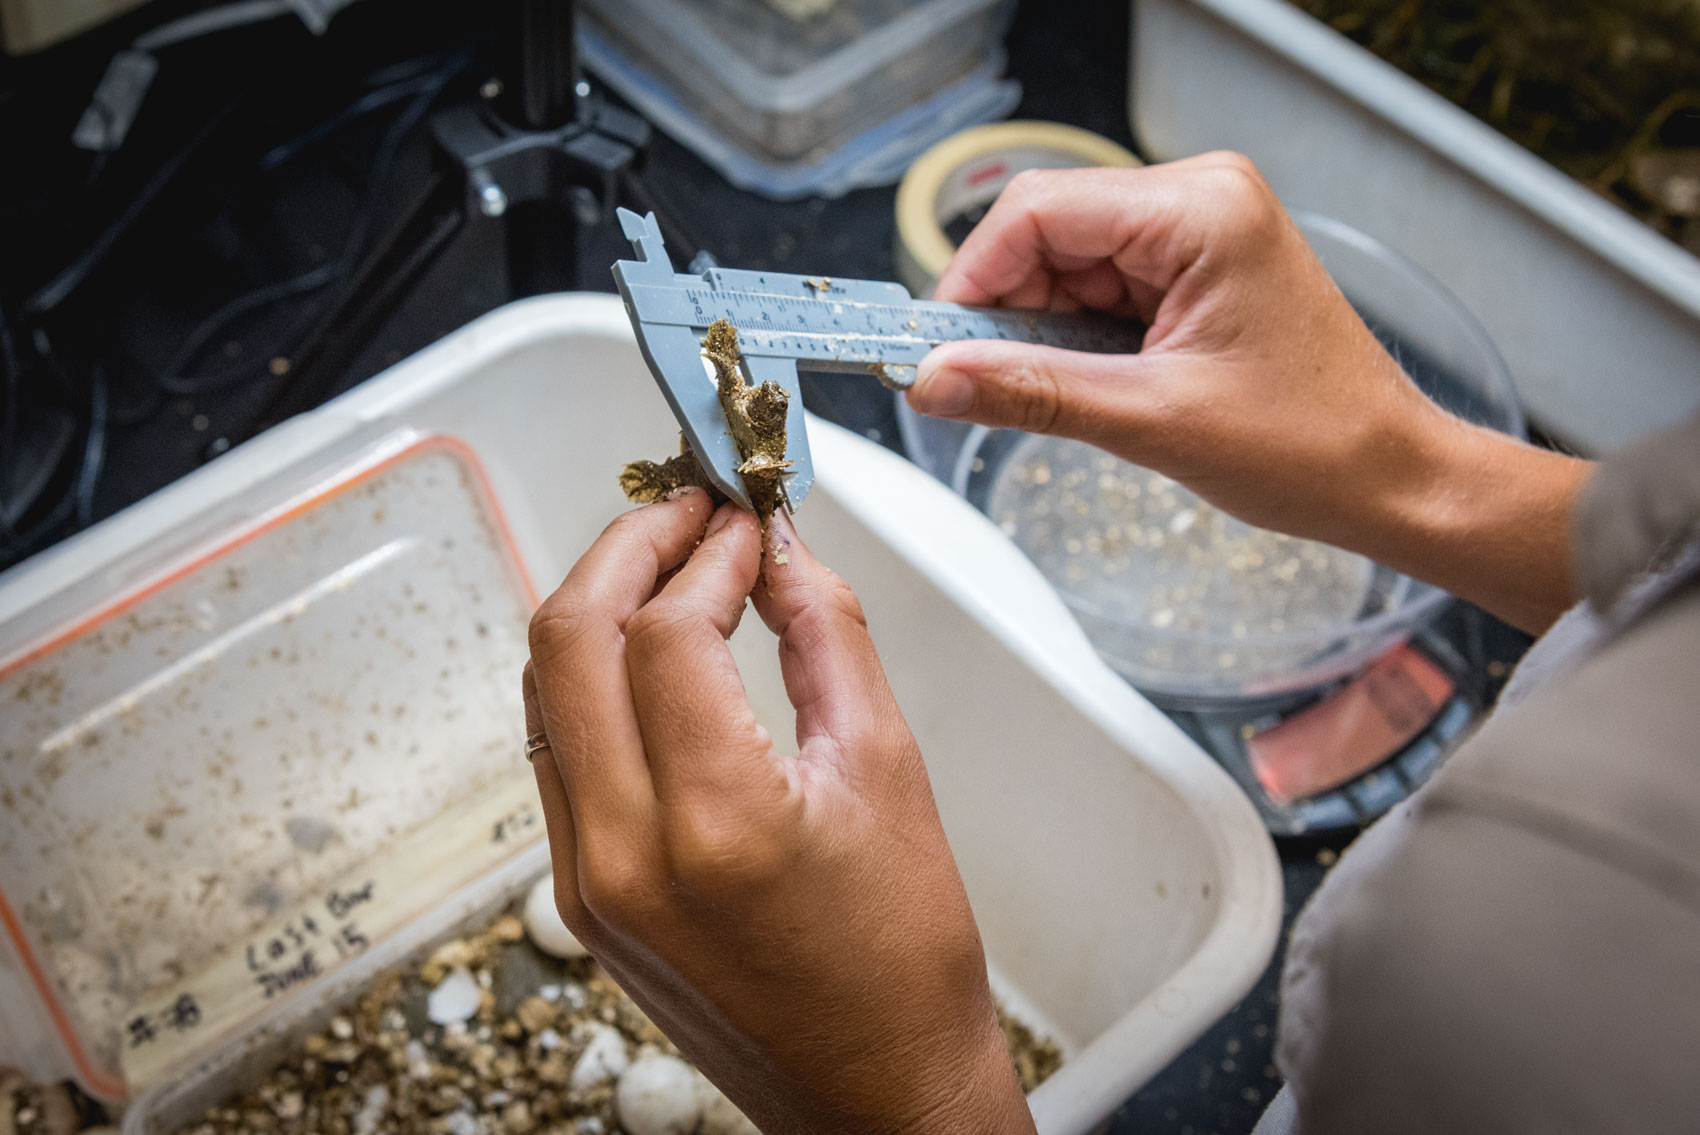 A research aassistant measures a baby spiny softshell turtle with a Vernier caliper